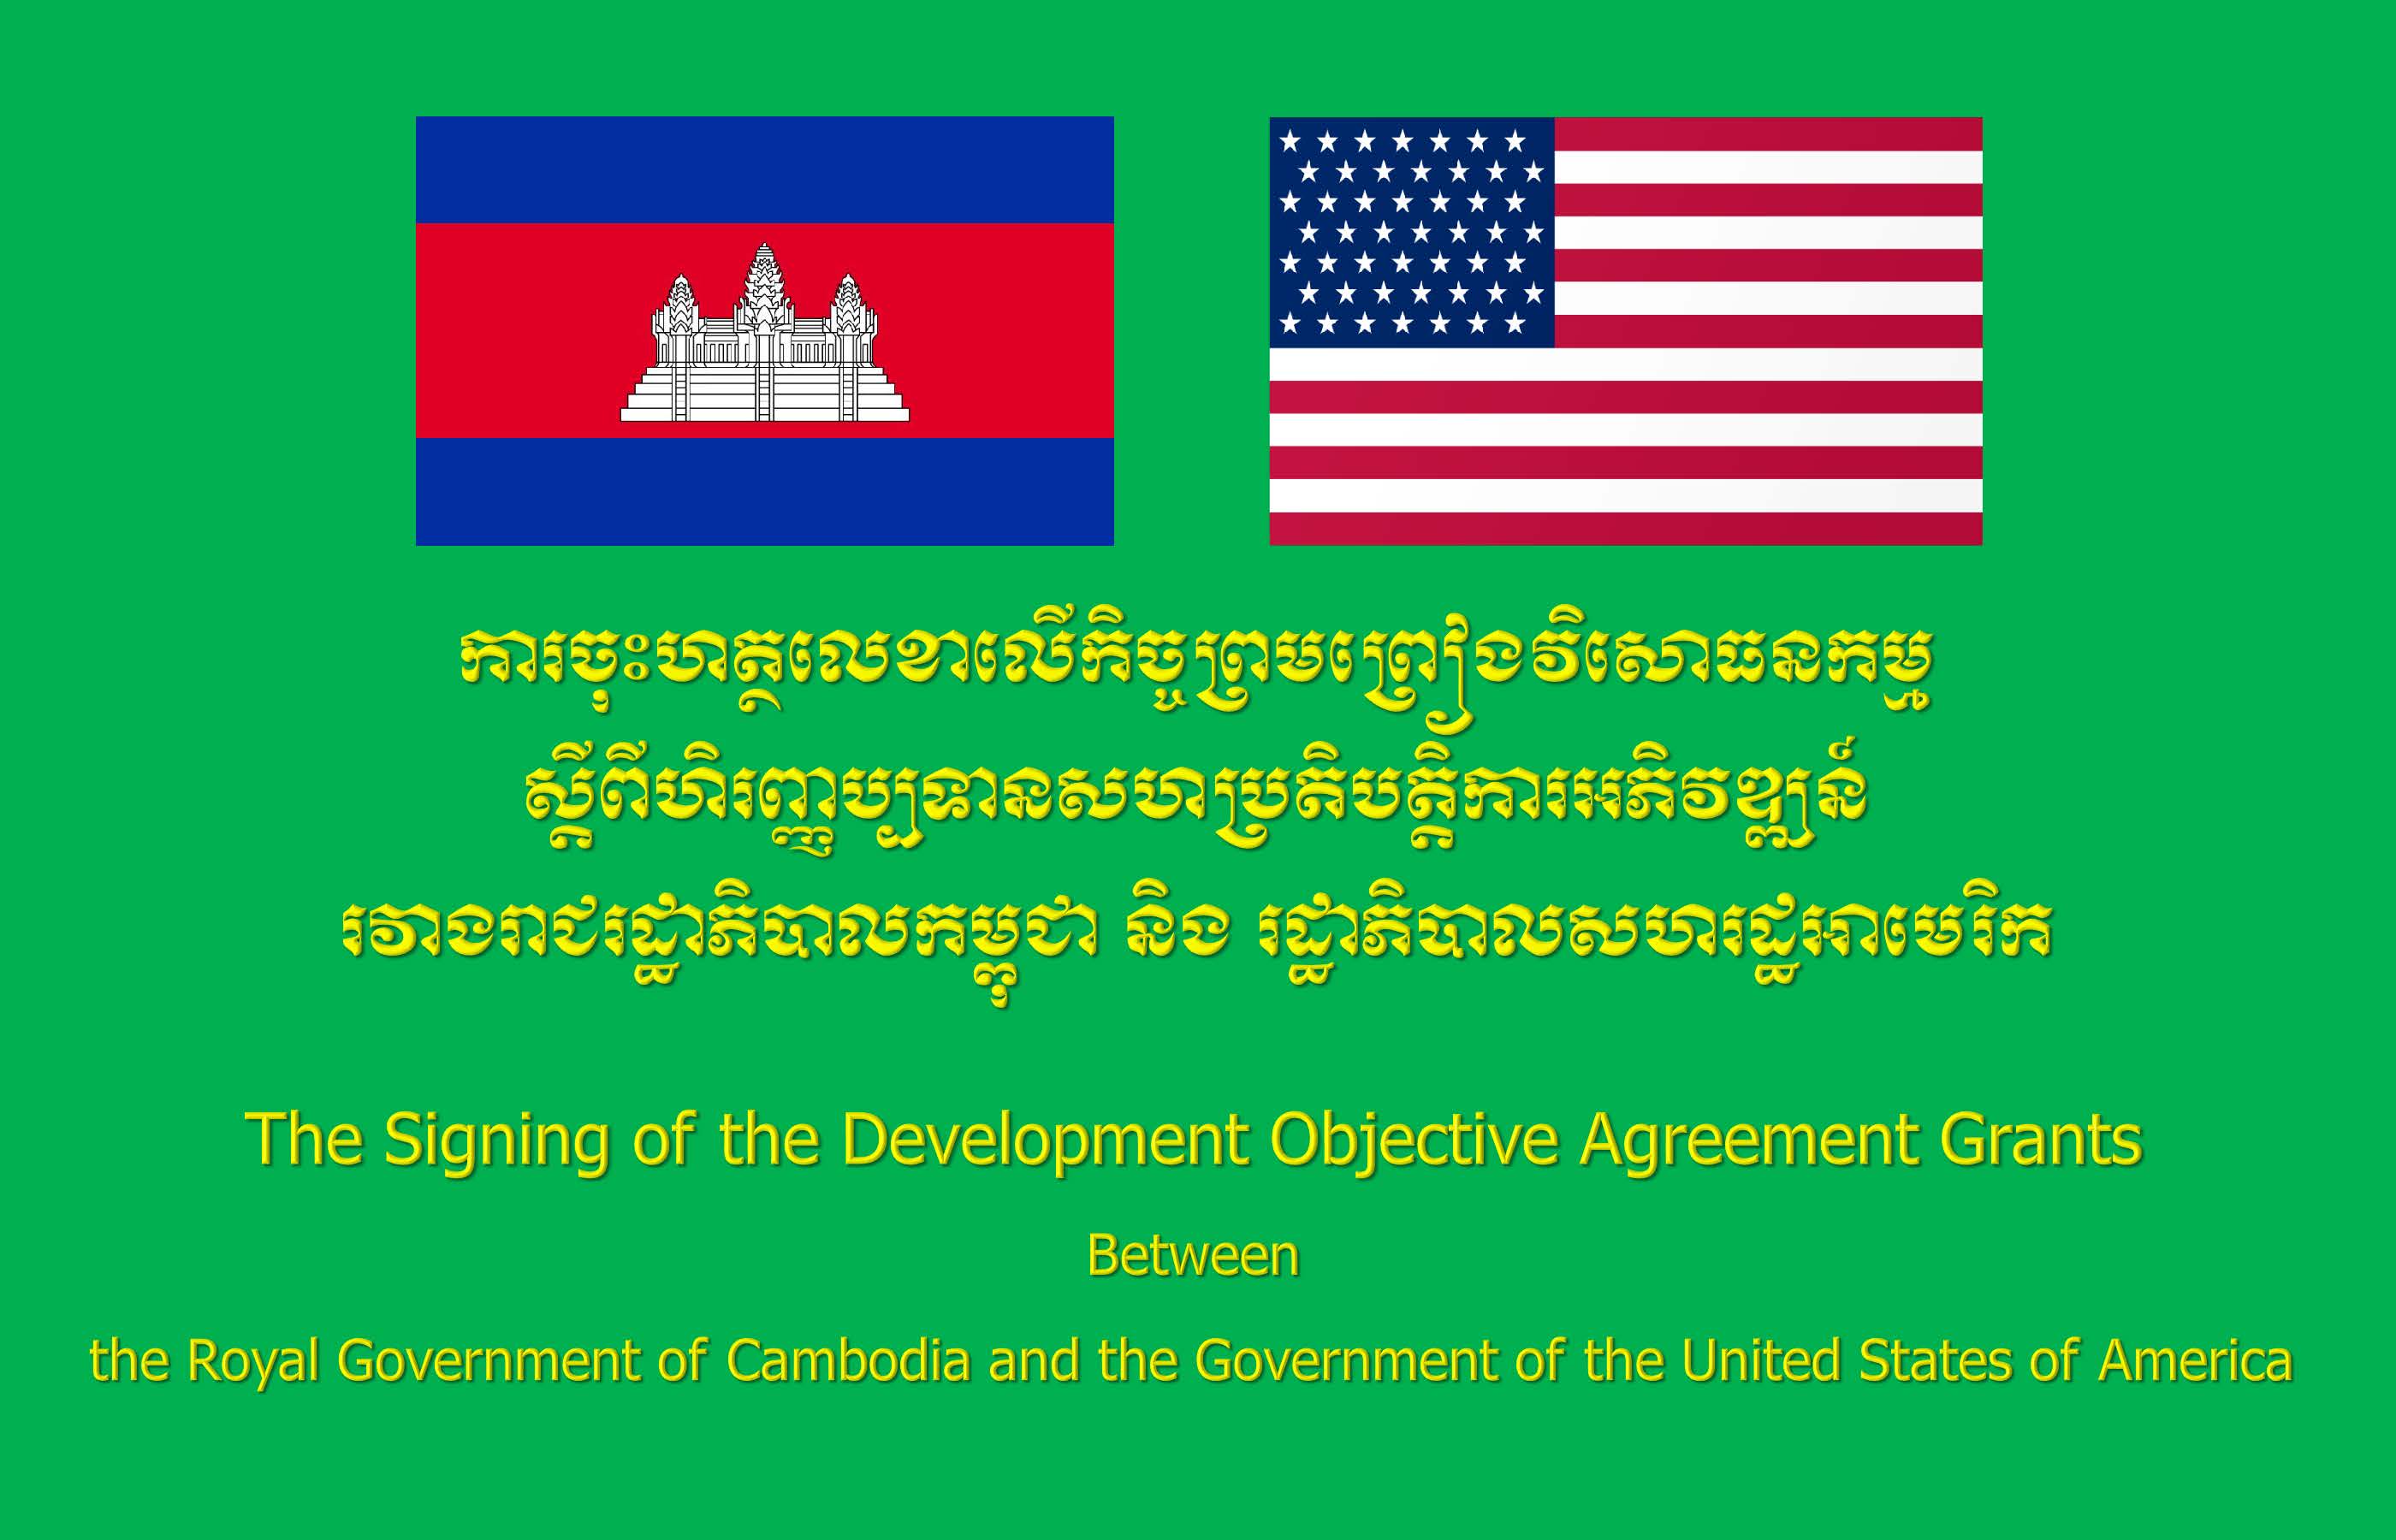 The Signing of the Development Objective Agreement Grants Between the Royal Government of Cambodia and the Government of the United States of America